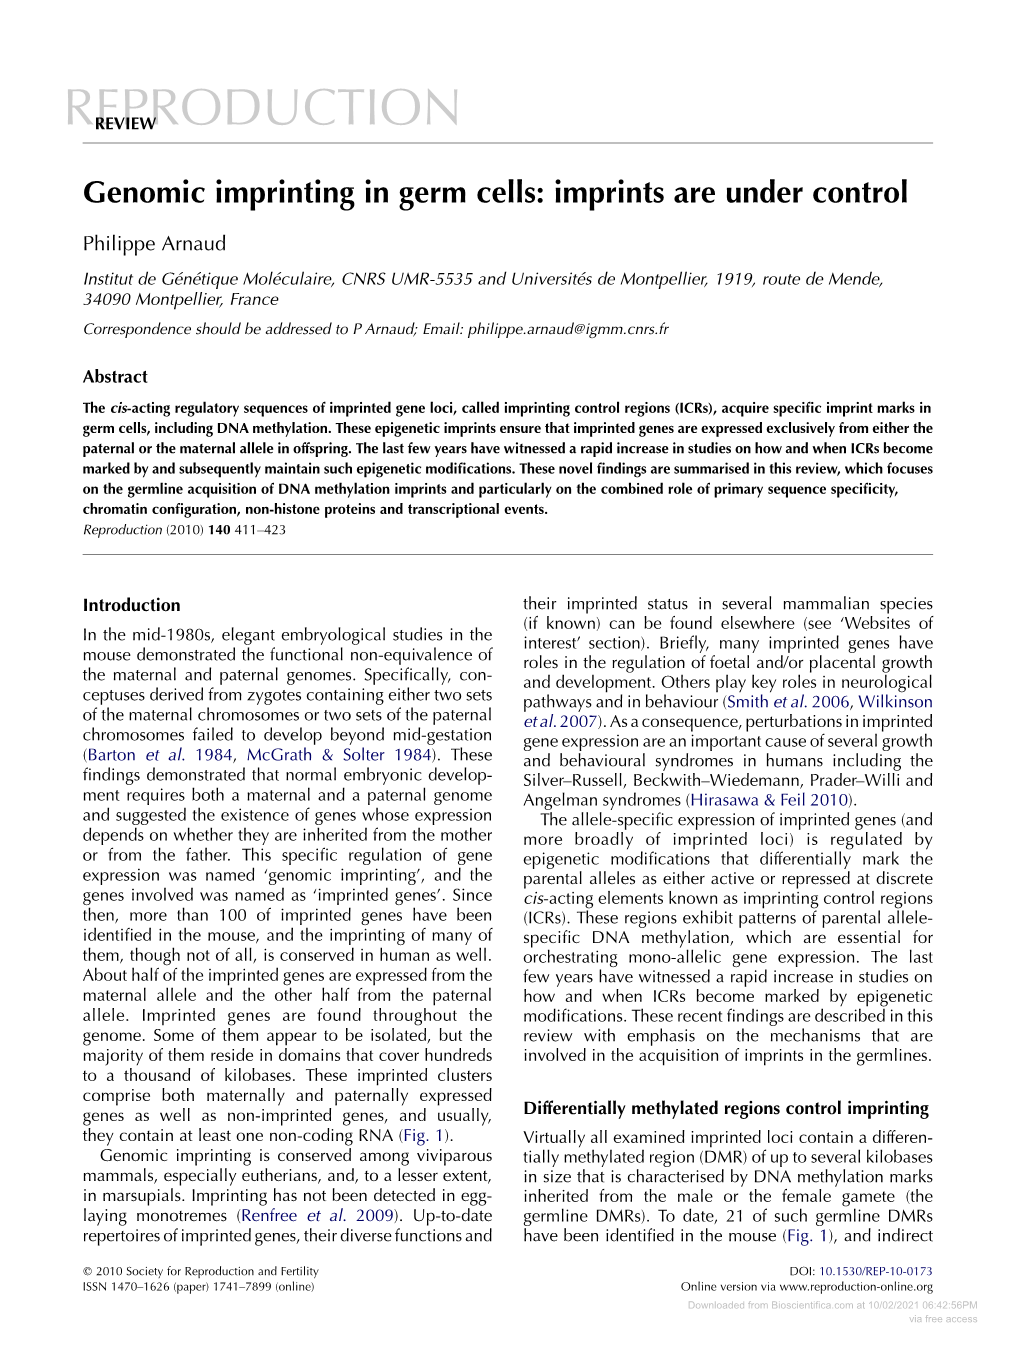 Genomic Imprinting in Germ Cells: Imprints Are Under Control